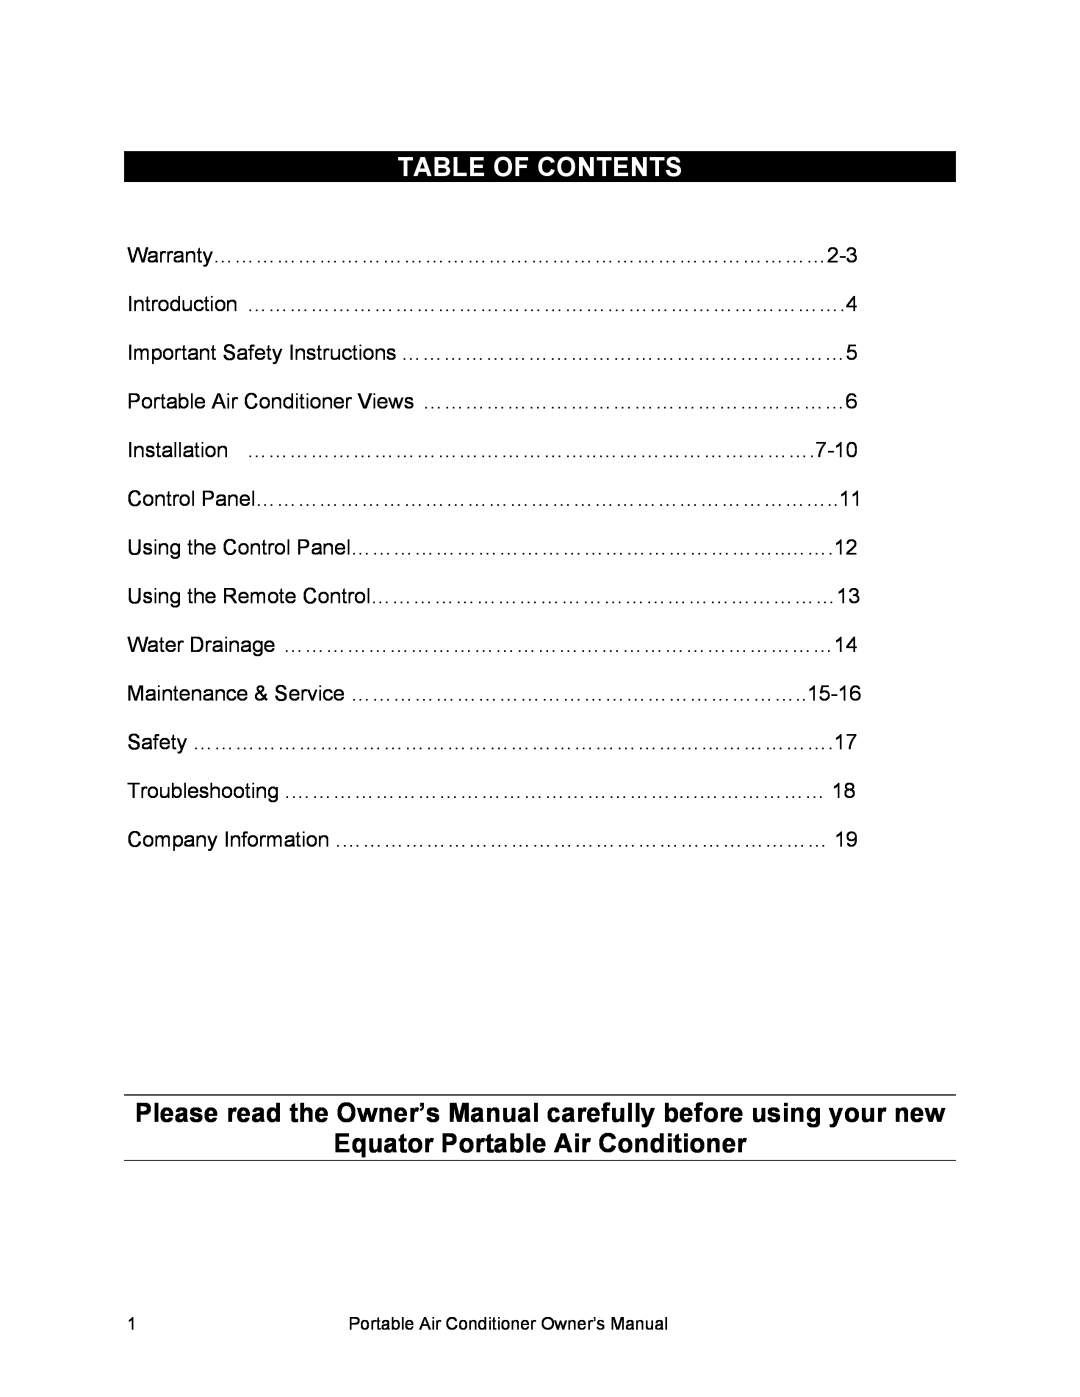 Equator PAC 10, PAC 8, PAC 12 owner manual Table Of Contents, Equator Portable Air Conditioner 